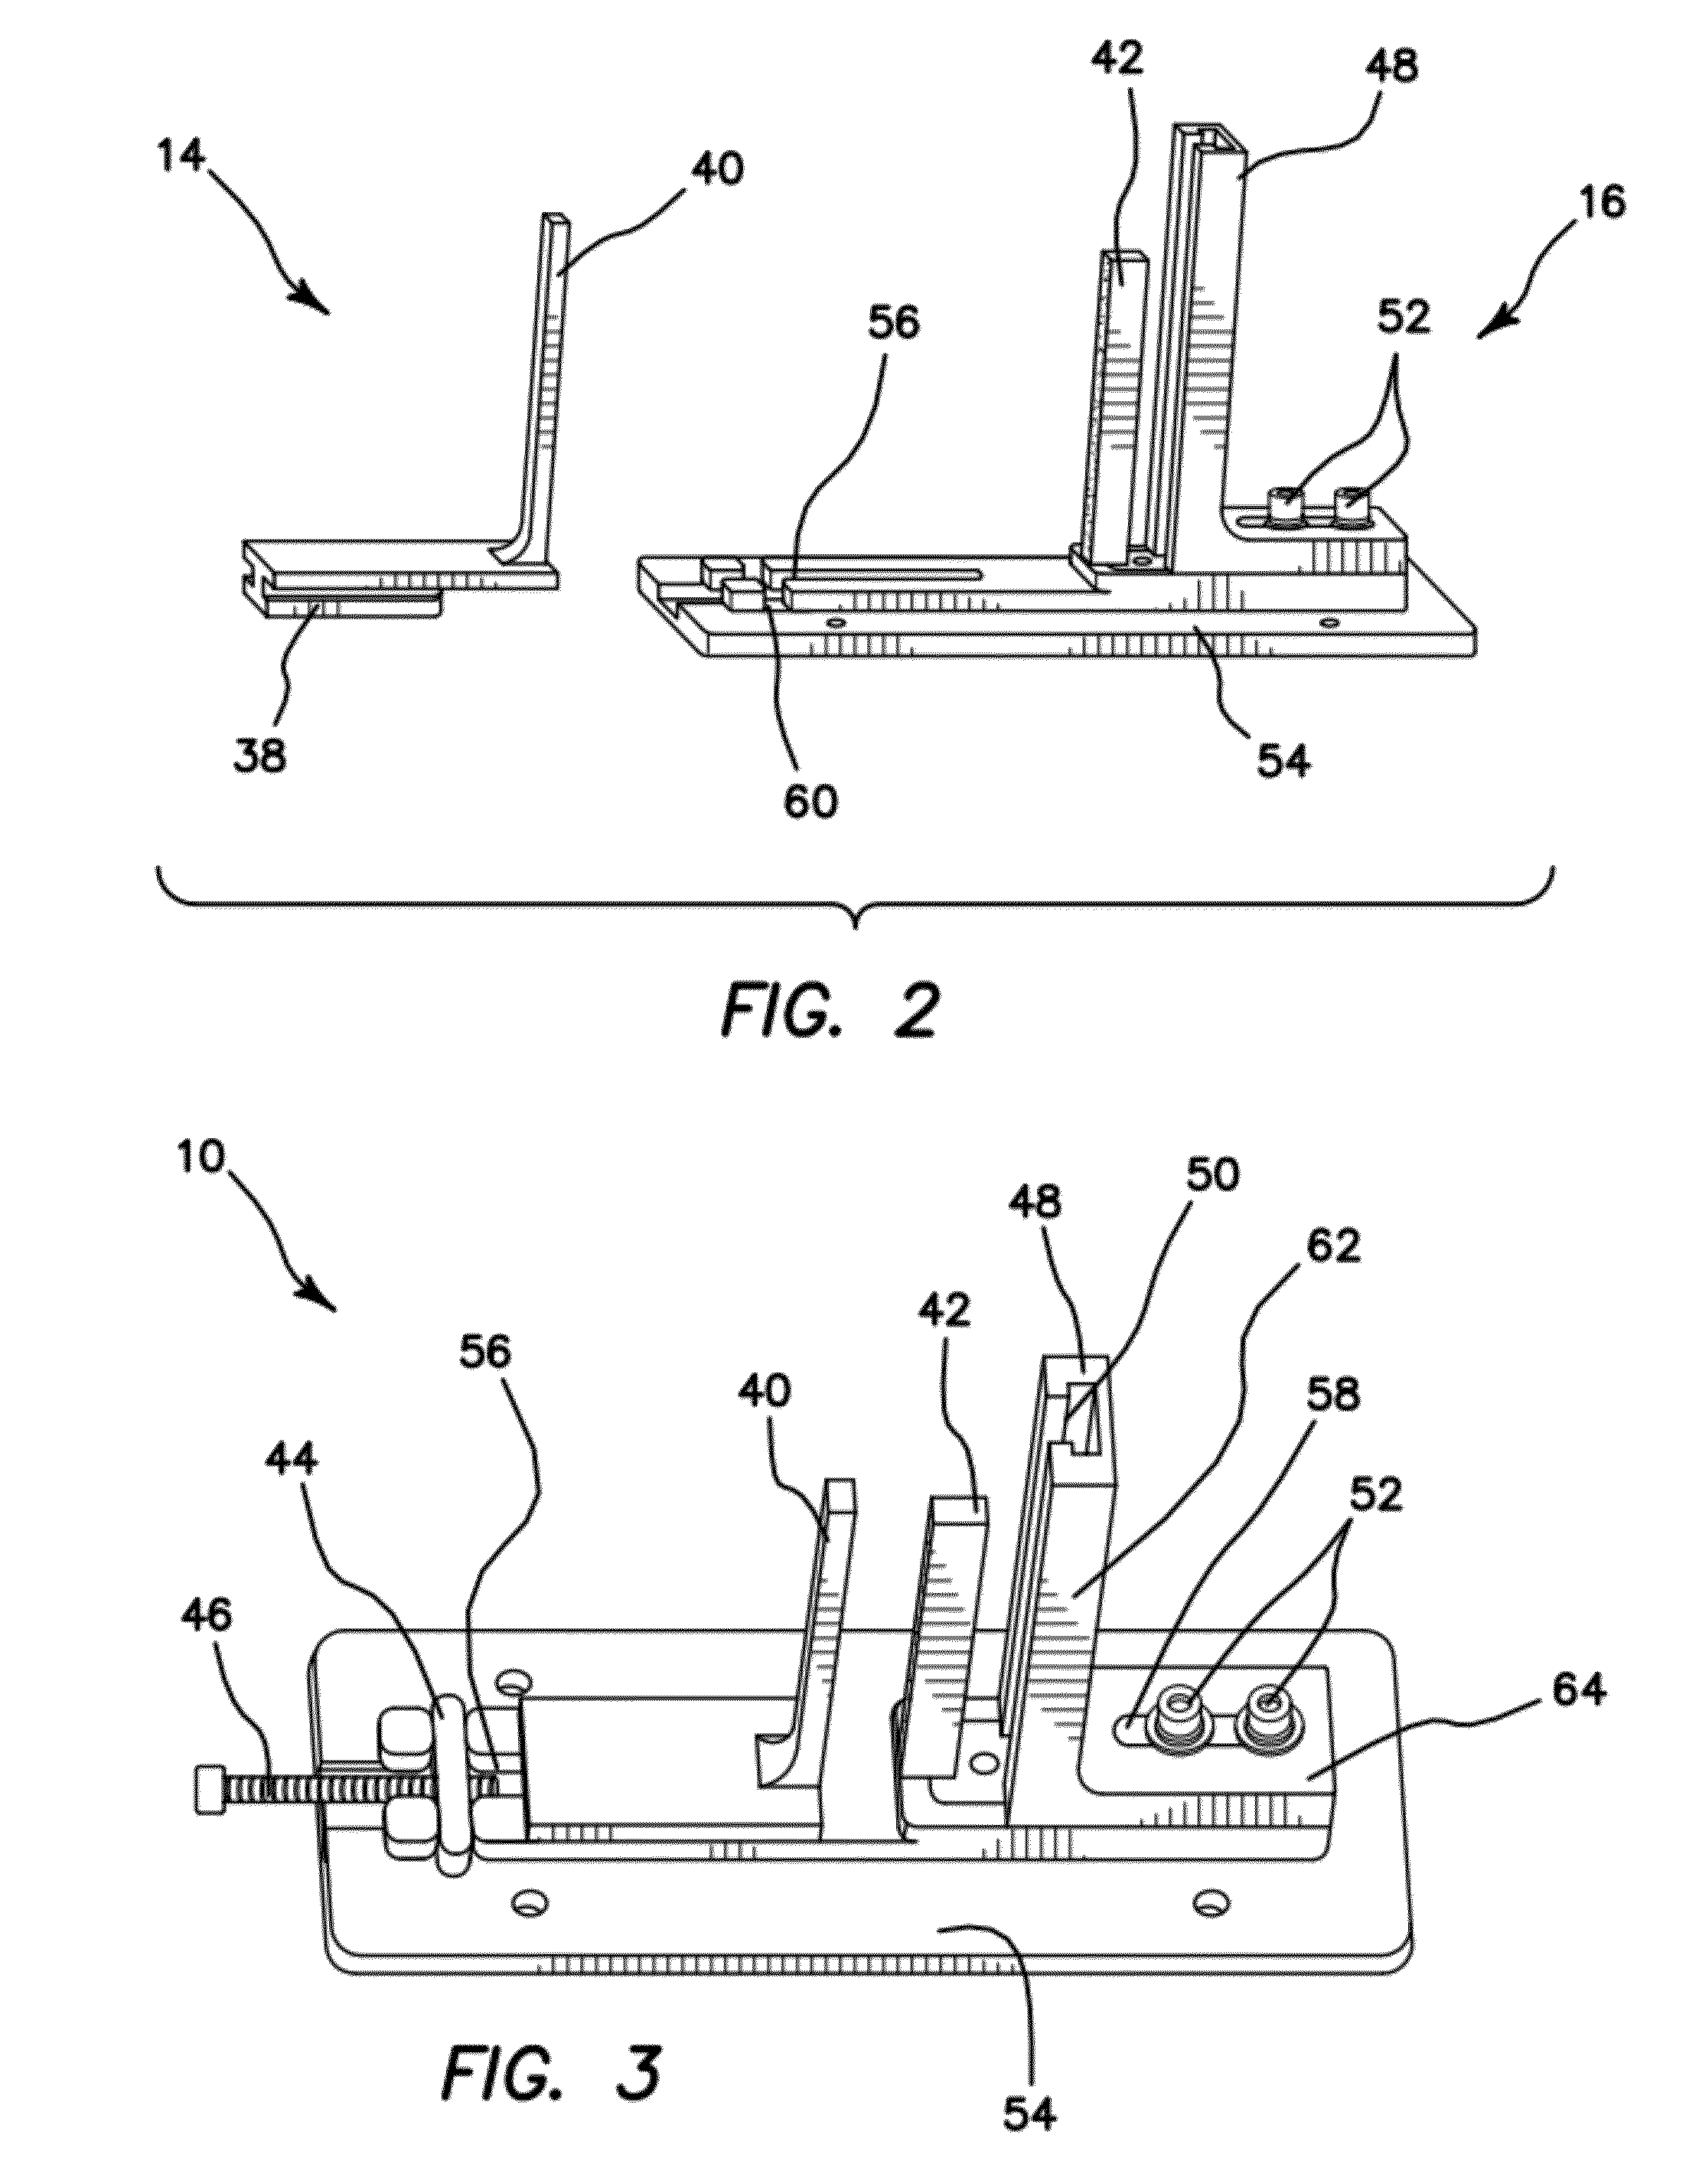 Apparatus and Method for Cutting Costal Cartilage